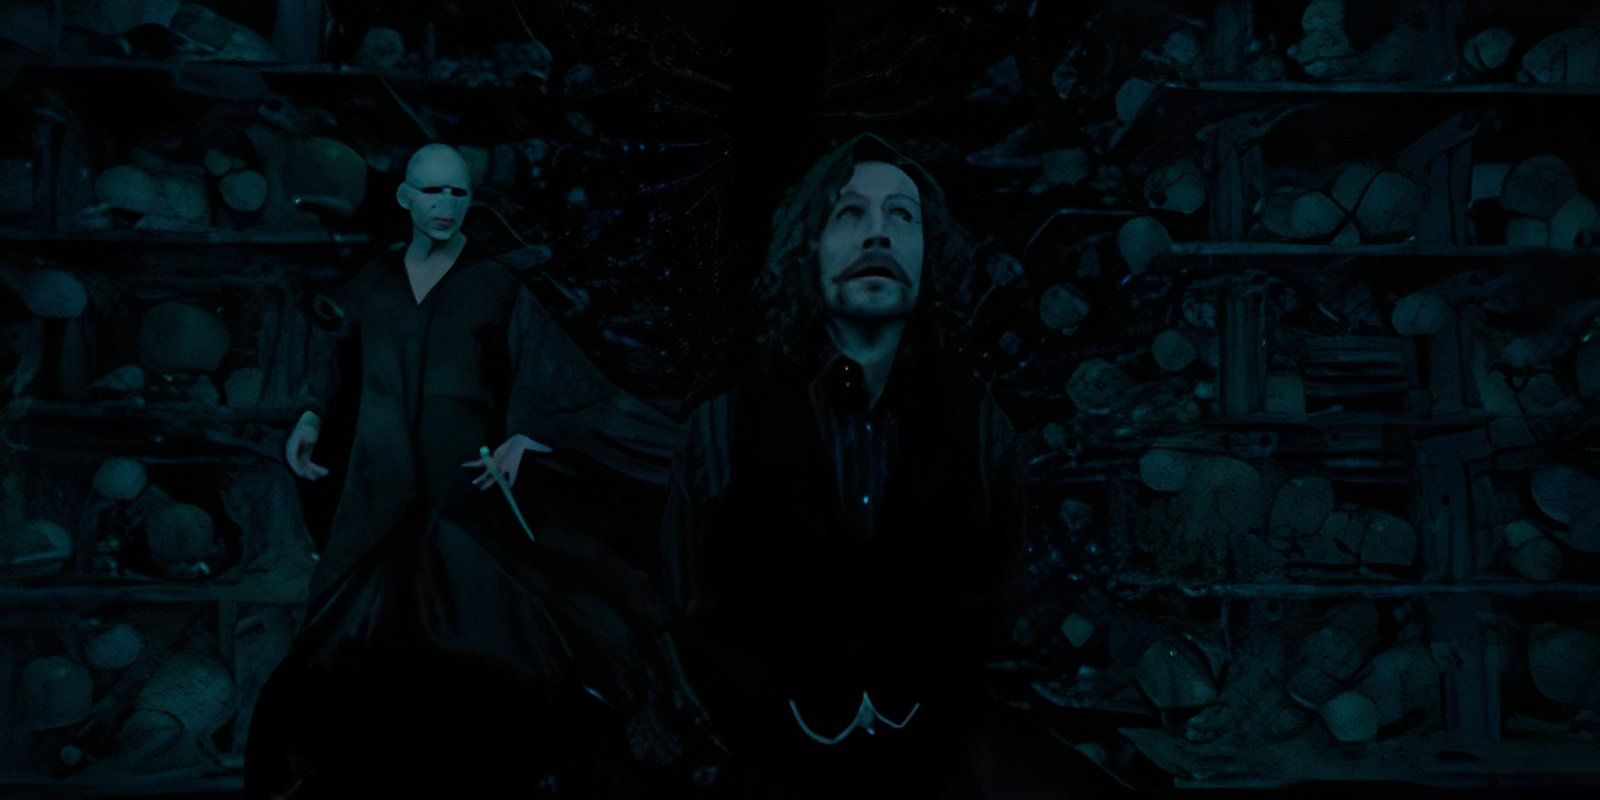 Ralph Fiennes as Voldemort and Gary Oldman as Sirius Black in Harry Potter and the Order of the Phoenix (1)